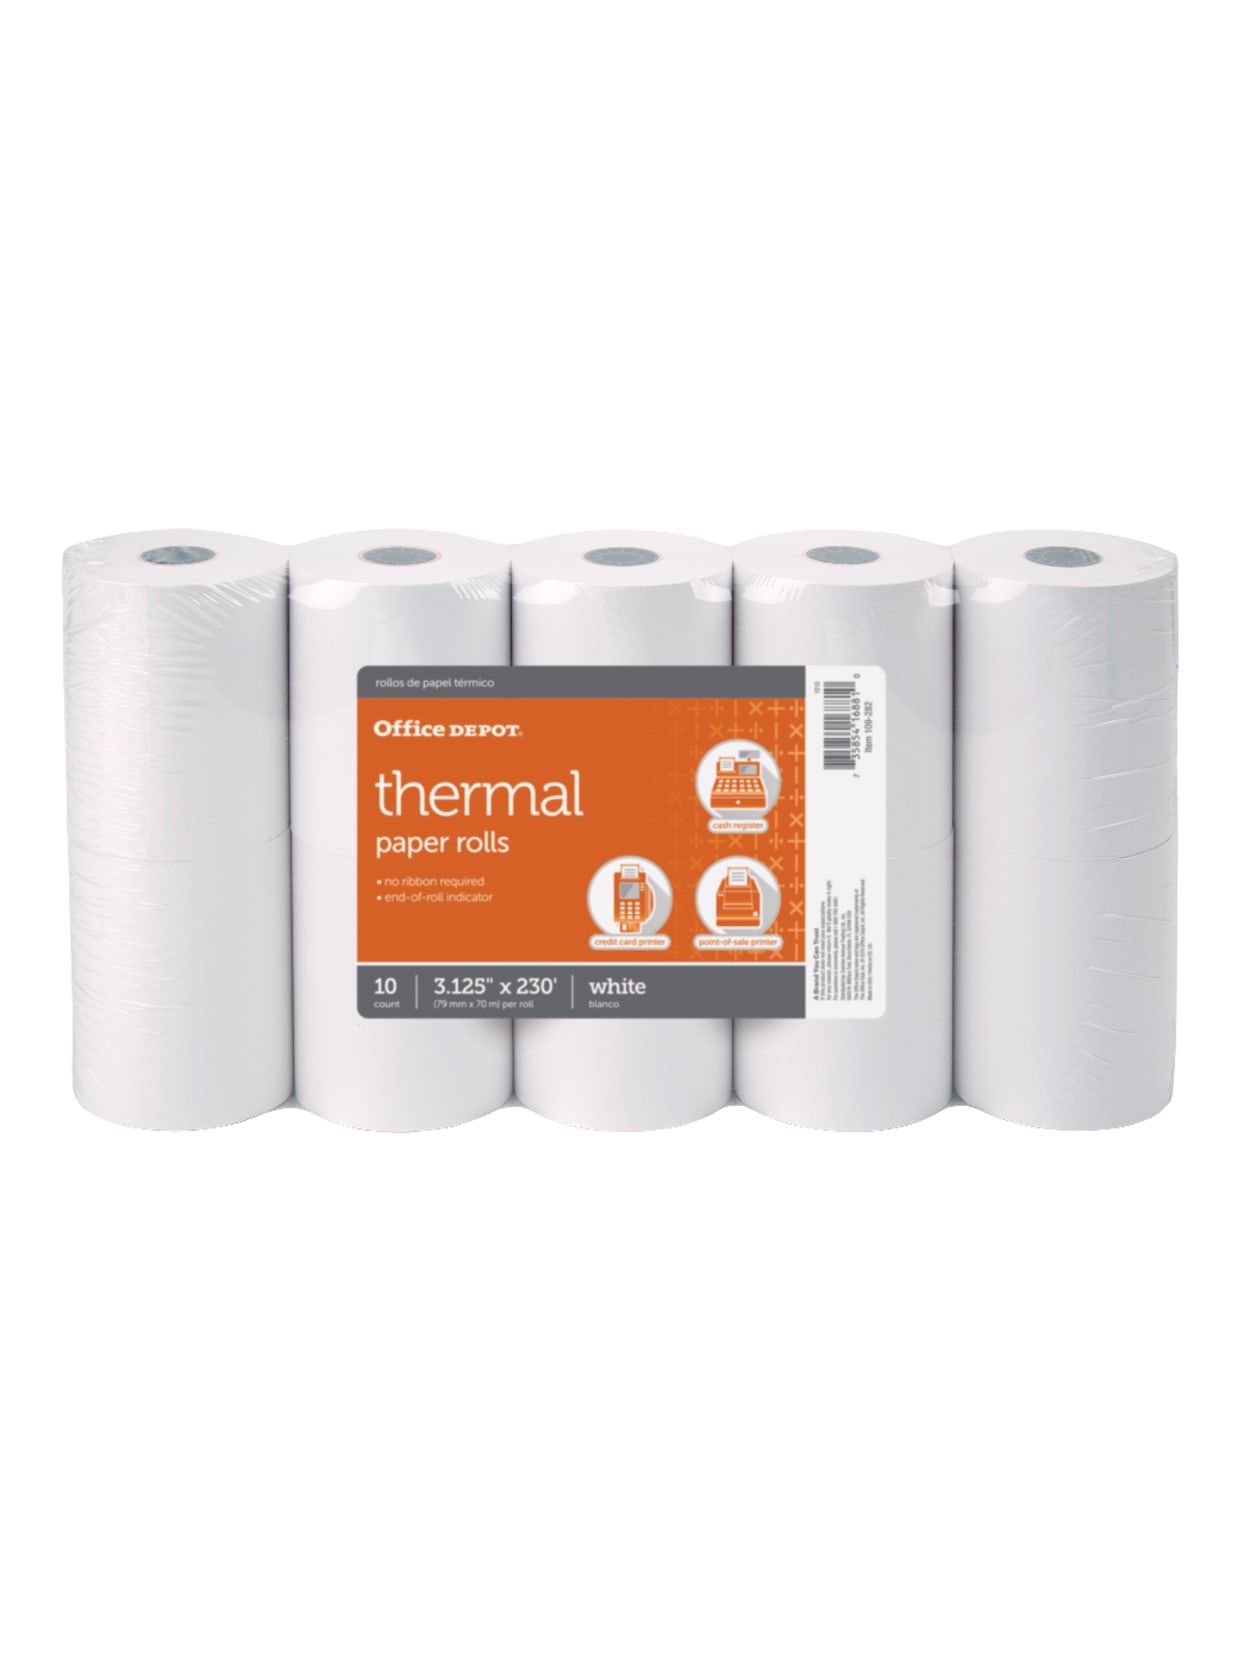 Office Depot Brand Thermal Paper Rolls 3 18 X 230 White Pack Of 10 Office Depot